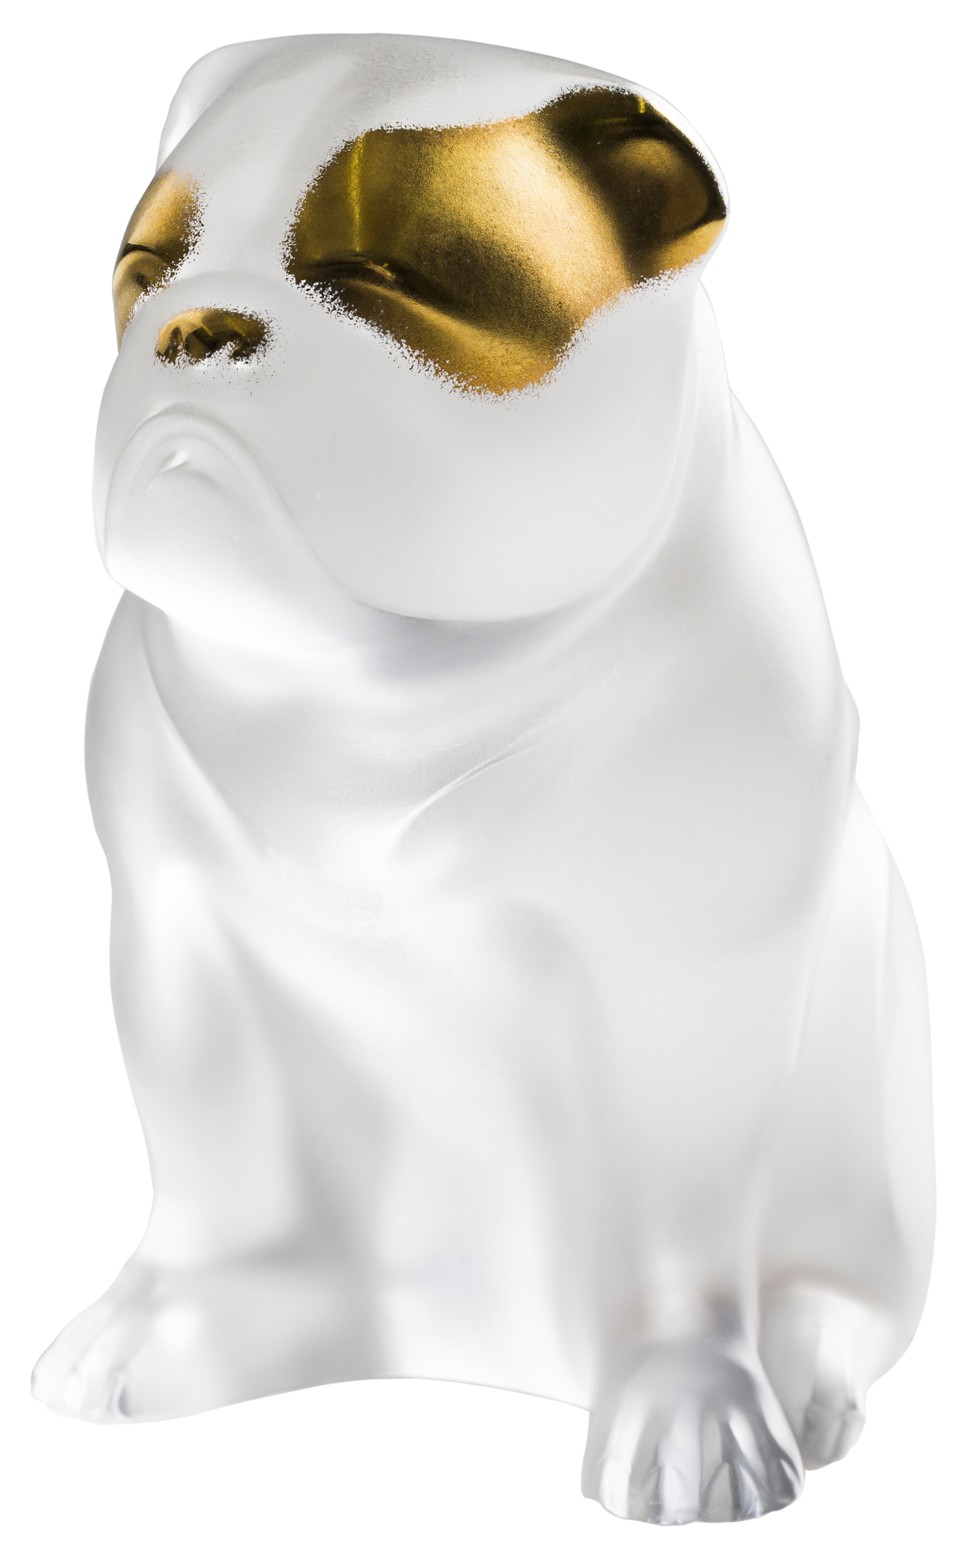 Lalique. Crafted from satin-finished crystal, this playful bulldog sculpture features splendid gold-tone stamps, HK$4,700